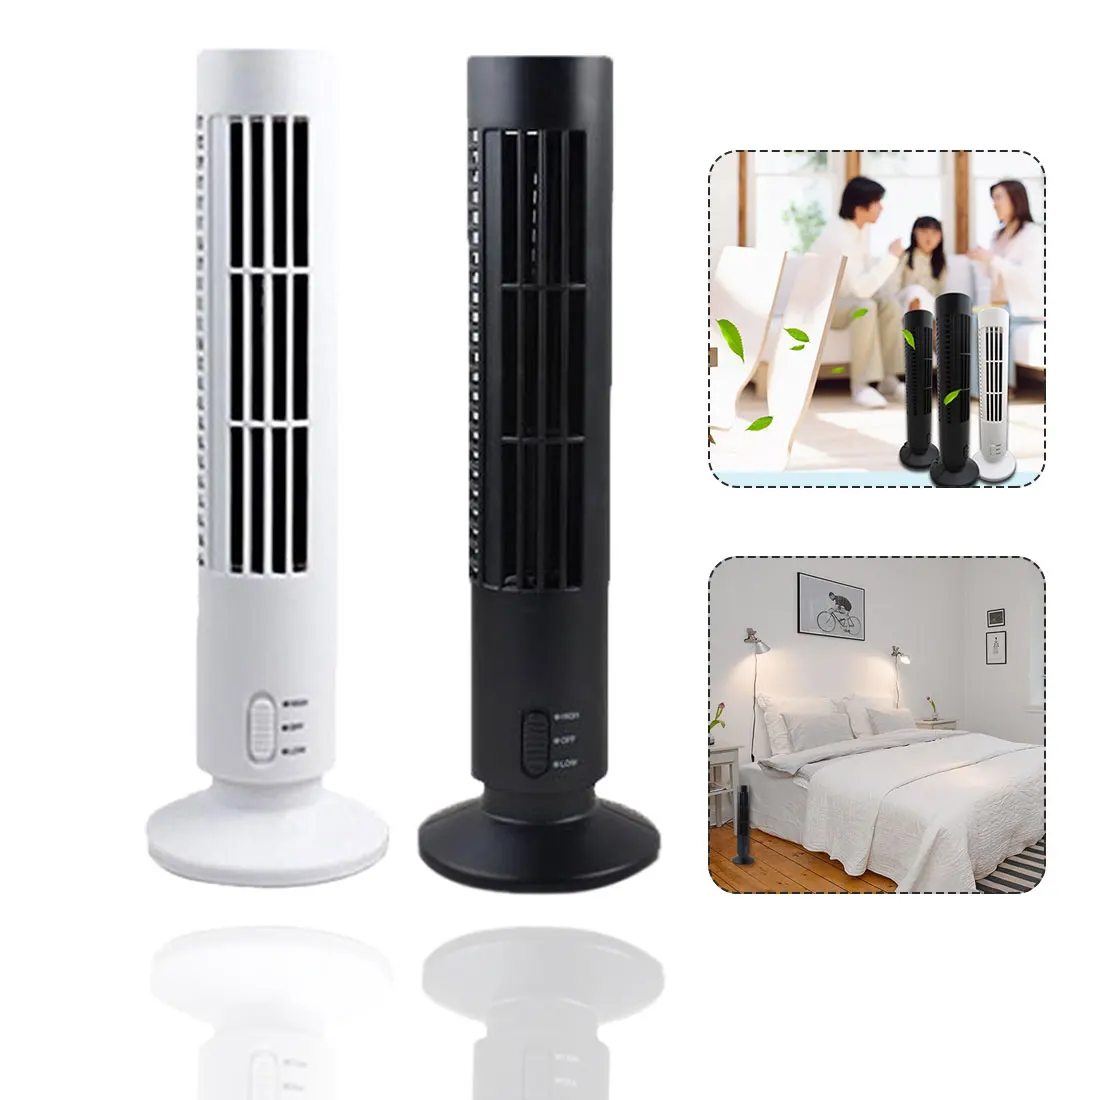 

Portable Mini 5V USB Air Conditioner Electric Vertical Bladeless Fan Summer Air Cooler For Home Office Travel Cooling Tower Fan